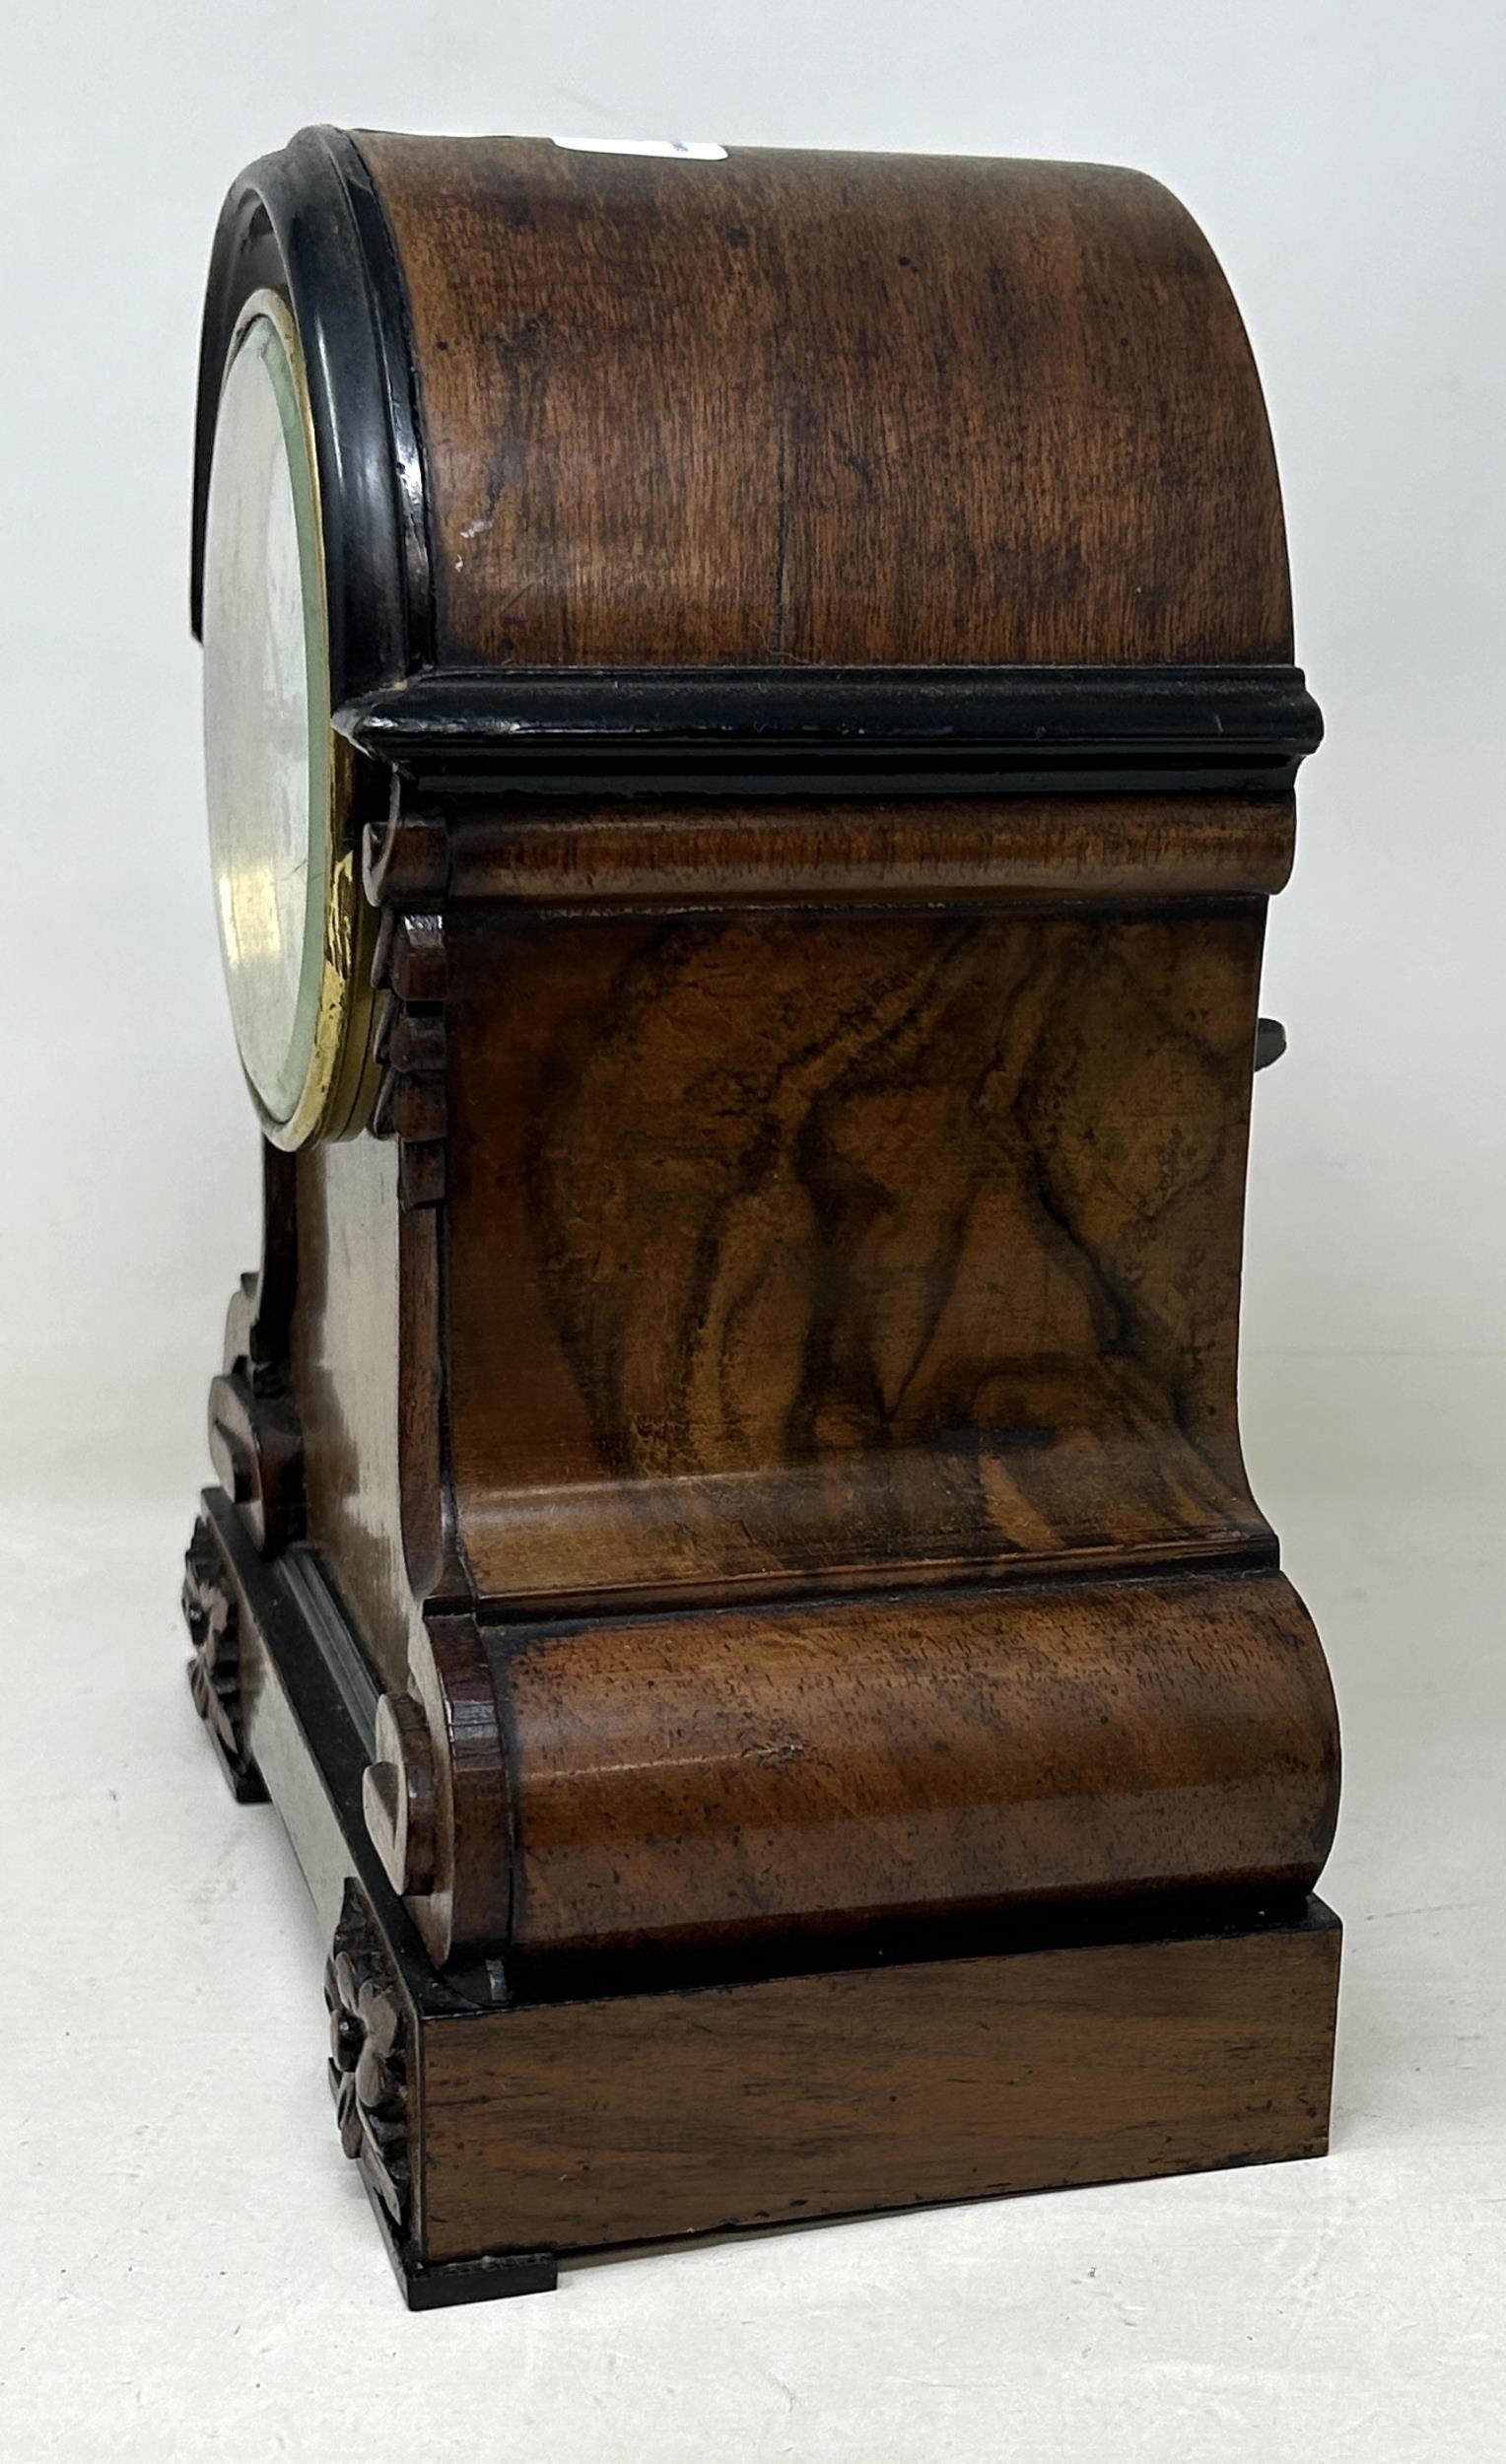 A mantel clock, by Aubert & Co, with an eight day movement, in a walnut case, 25 cm high - Image 2 of 5